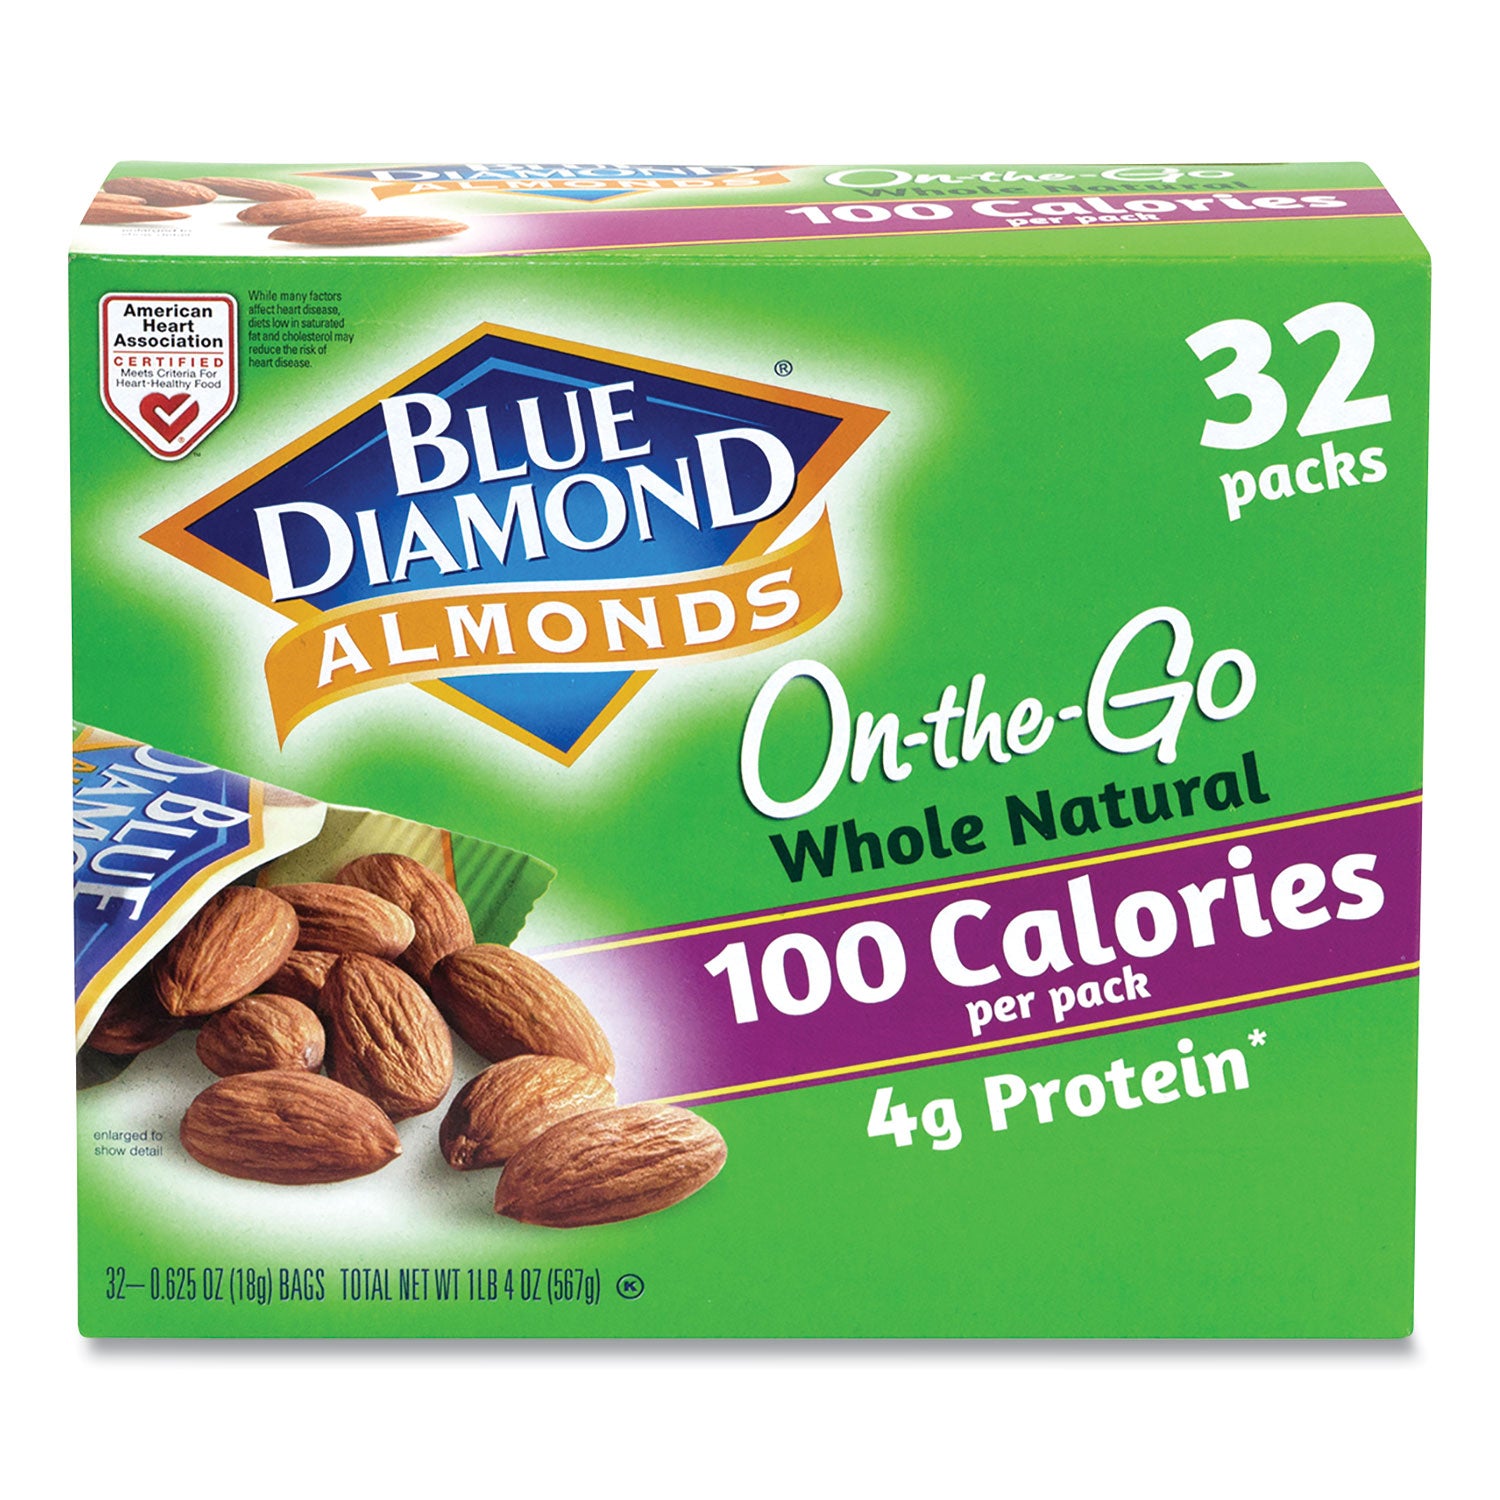 whole-natural-almonds-on-the-go-063-oz-pouch-32-pouches-carton-ships-in-1-3-business-days_grr22000512 - 2